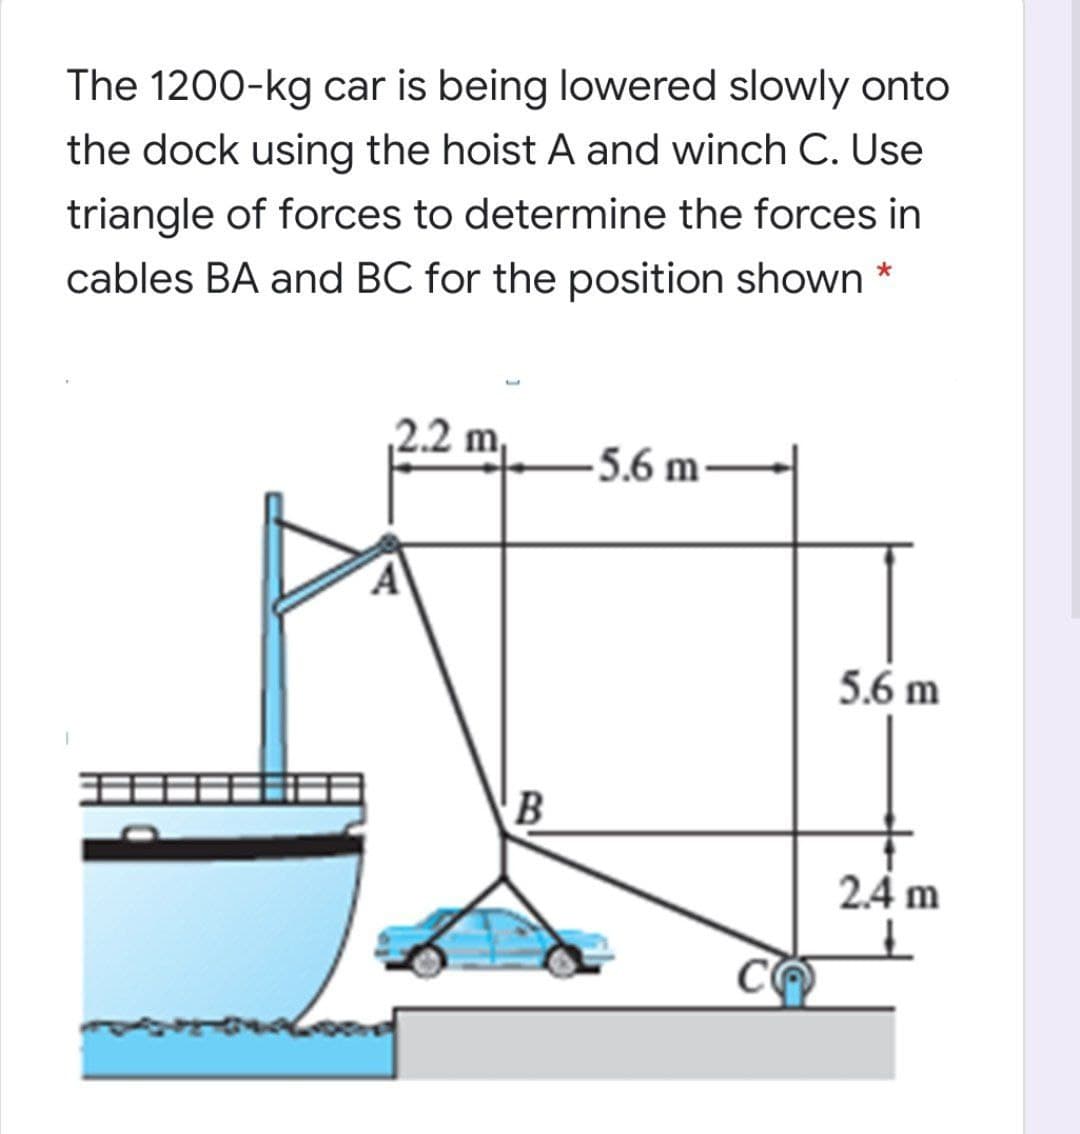 The 1200-kg car is being lowered slowly onto
the dock using the hoist A and winch C. Use
triangle of forces to determine the forces in
cables BA and BC for the position shown
2.2 m,
-5.6 m -
5.6 m
B
2.4 m
CO
